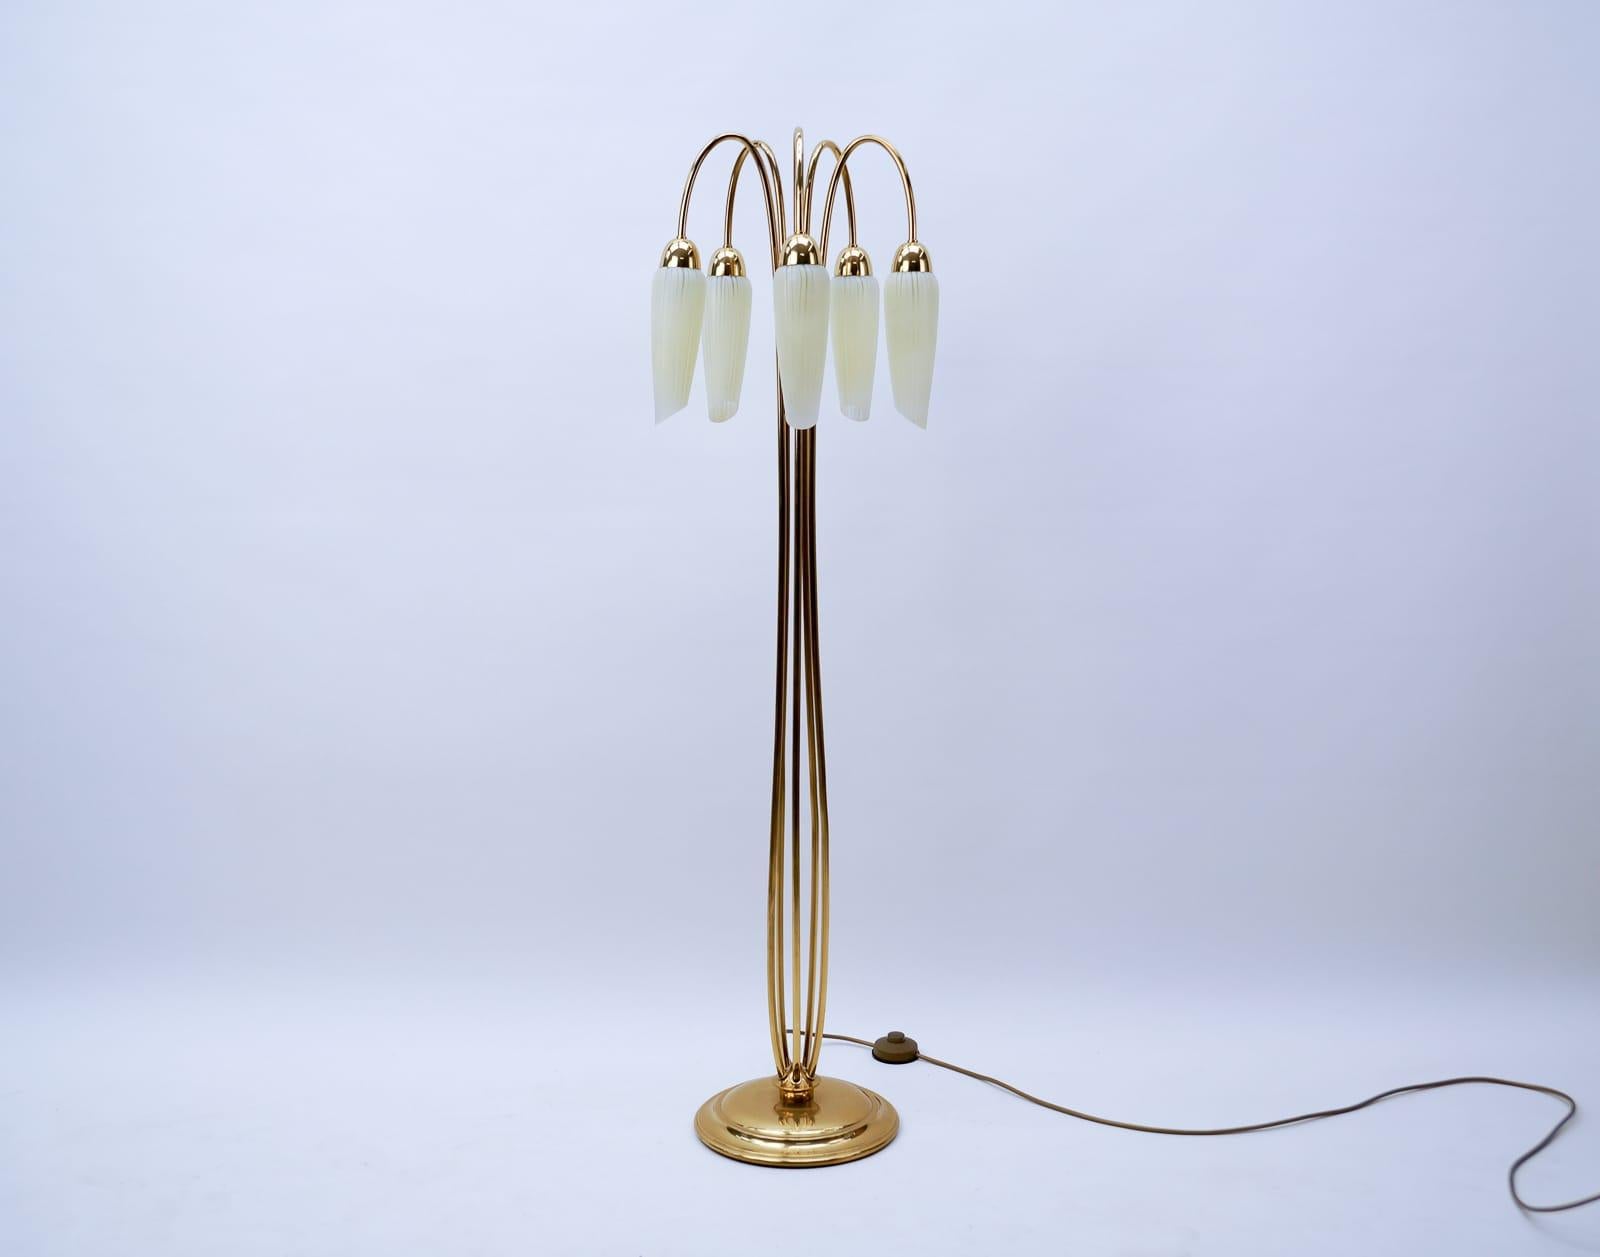 Italian Very Rare Mid-Century Modern Floor Lamp with Five Glass Shades, 1950s Italy For Sale